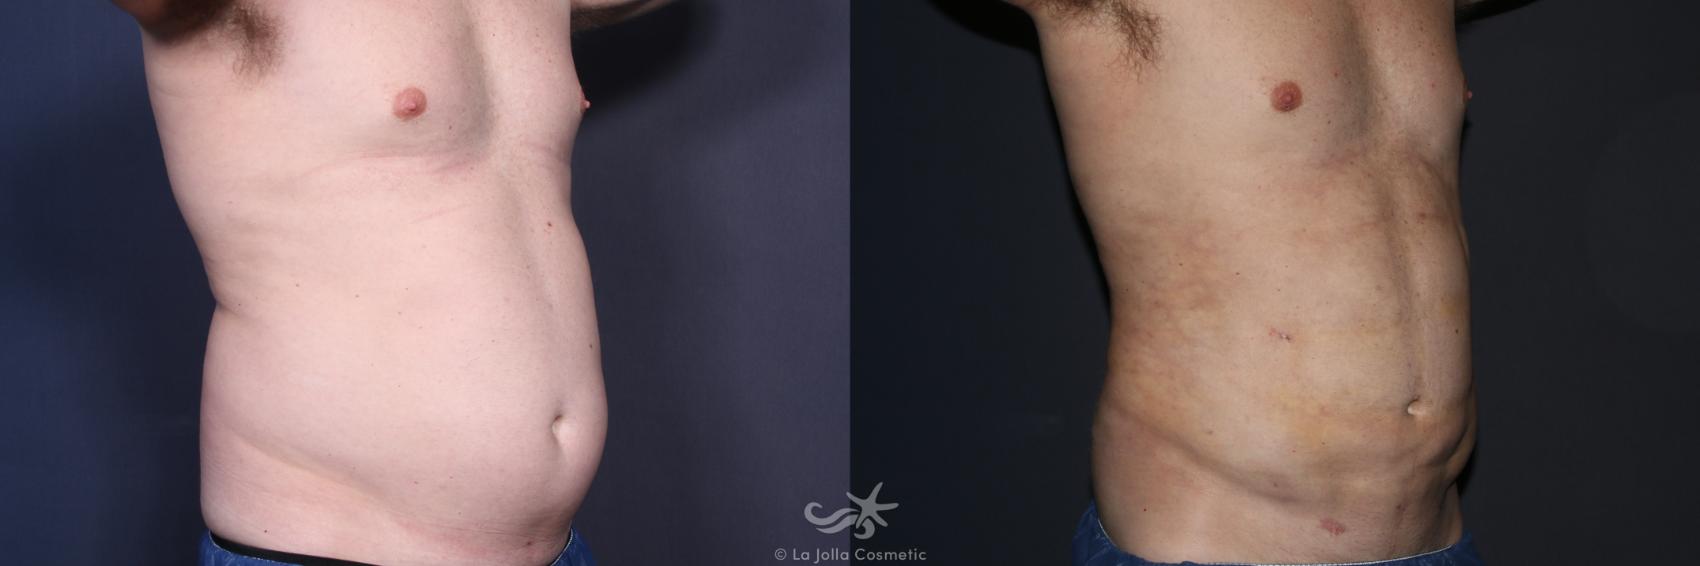 Before & After High Definition Liposuction Result 132 Right Oblique View in San Diego, CA